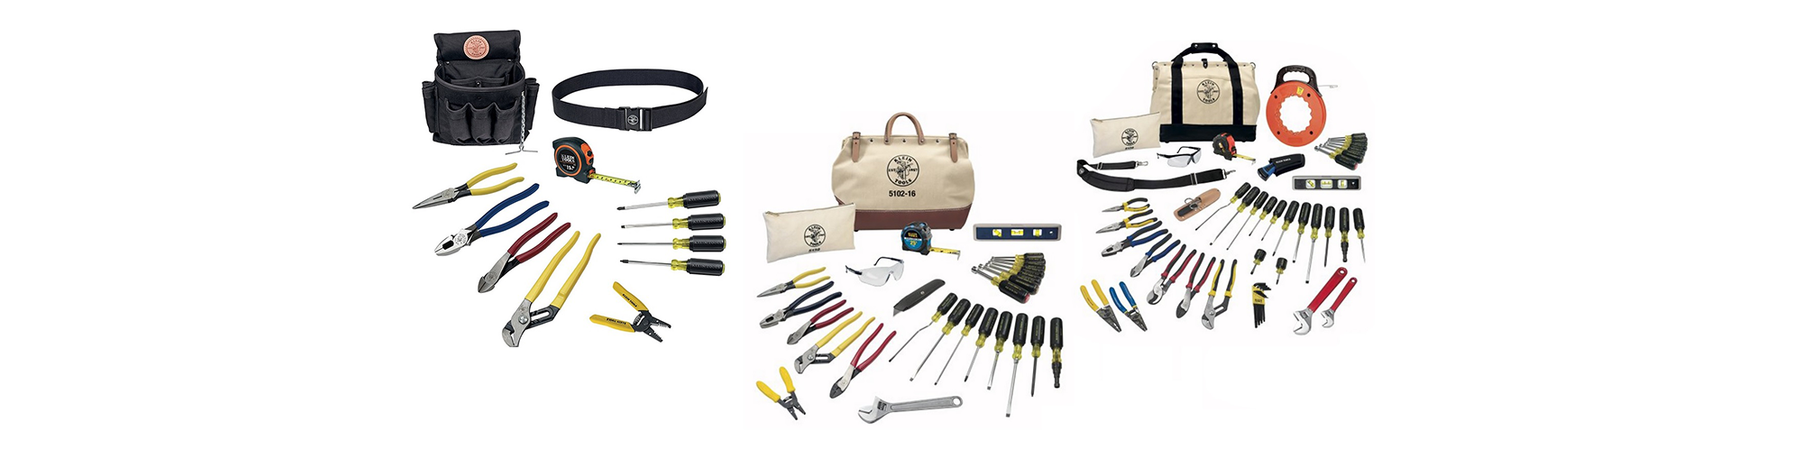 Klein Tool Sets To Build Your Tool Box